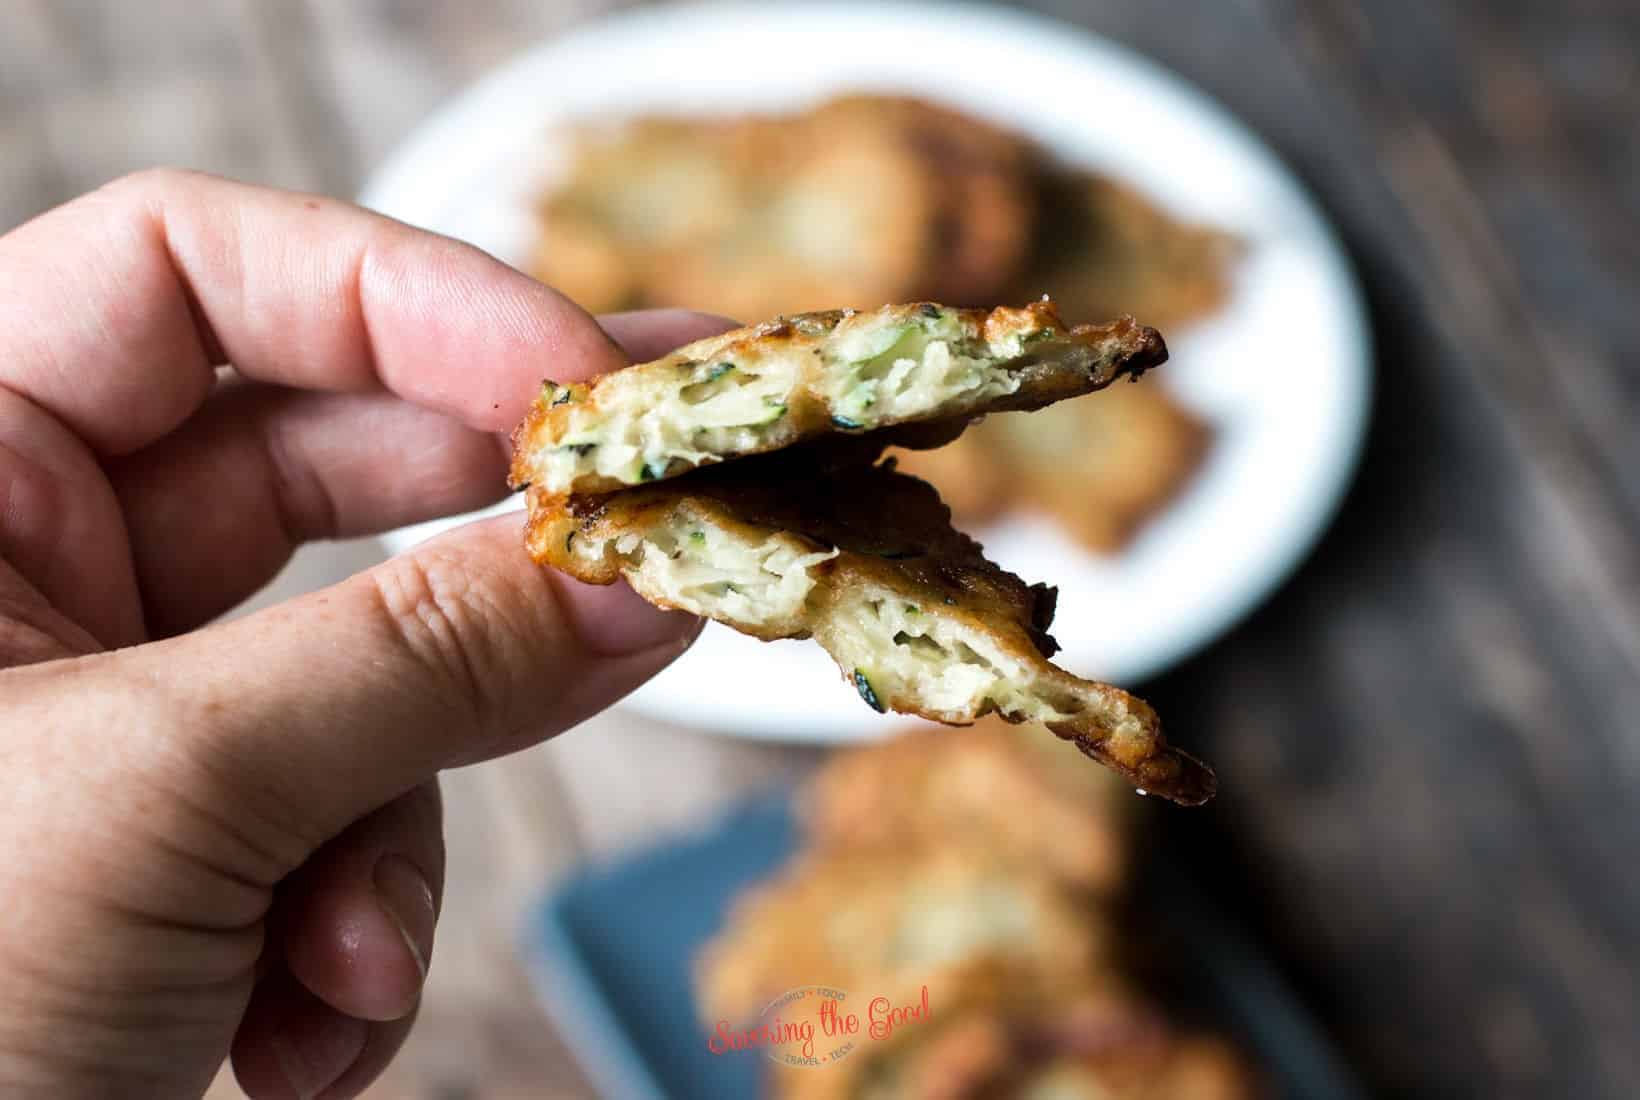 zucchini fritter slit in half showing inside texture.